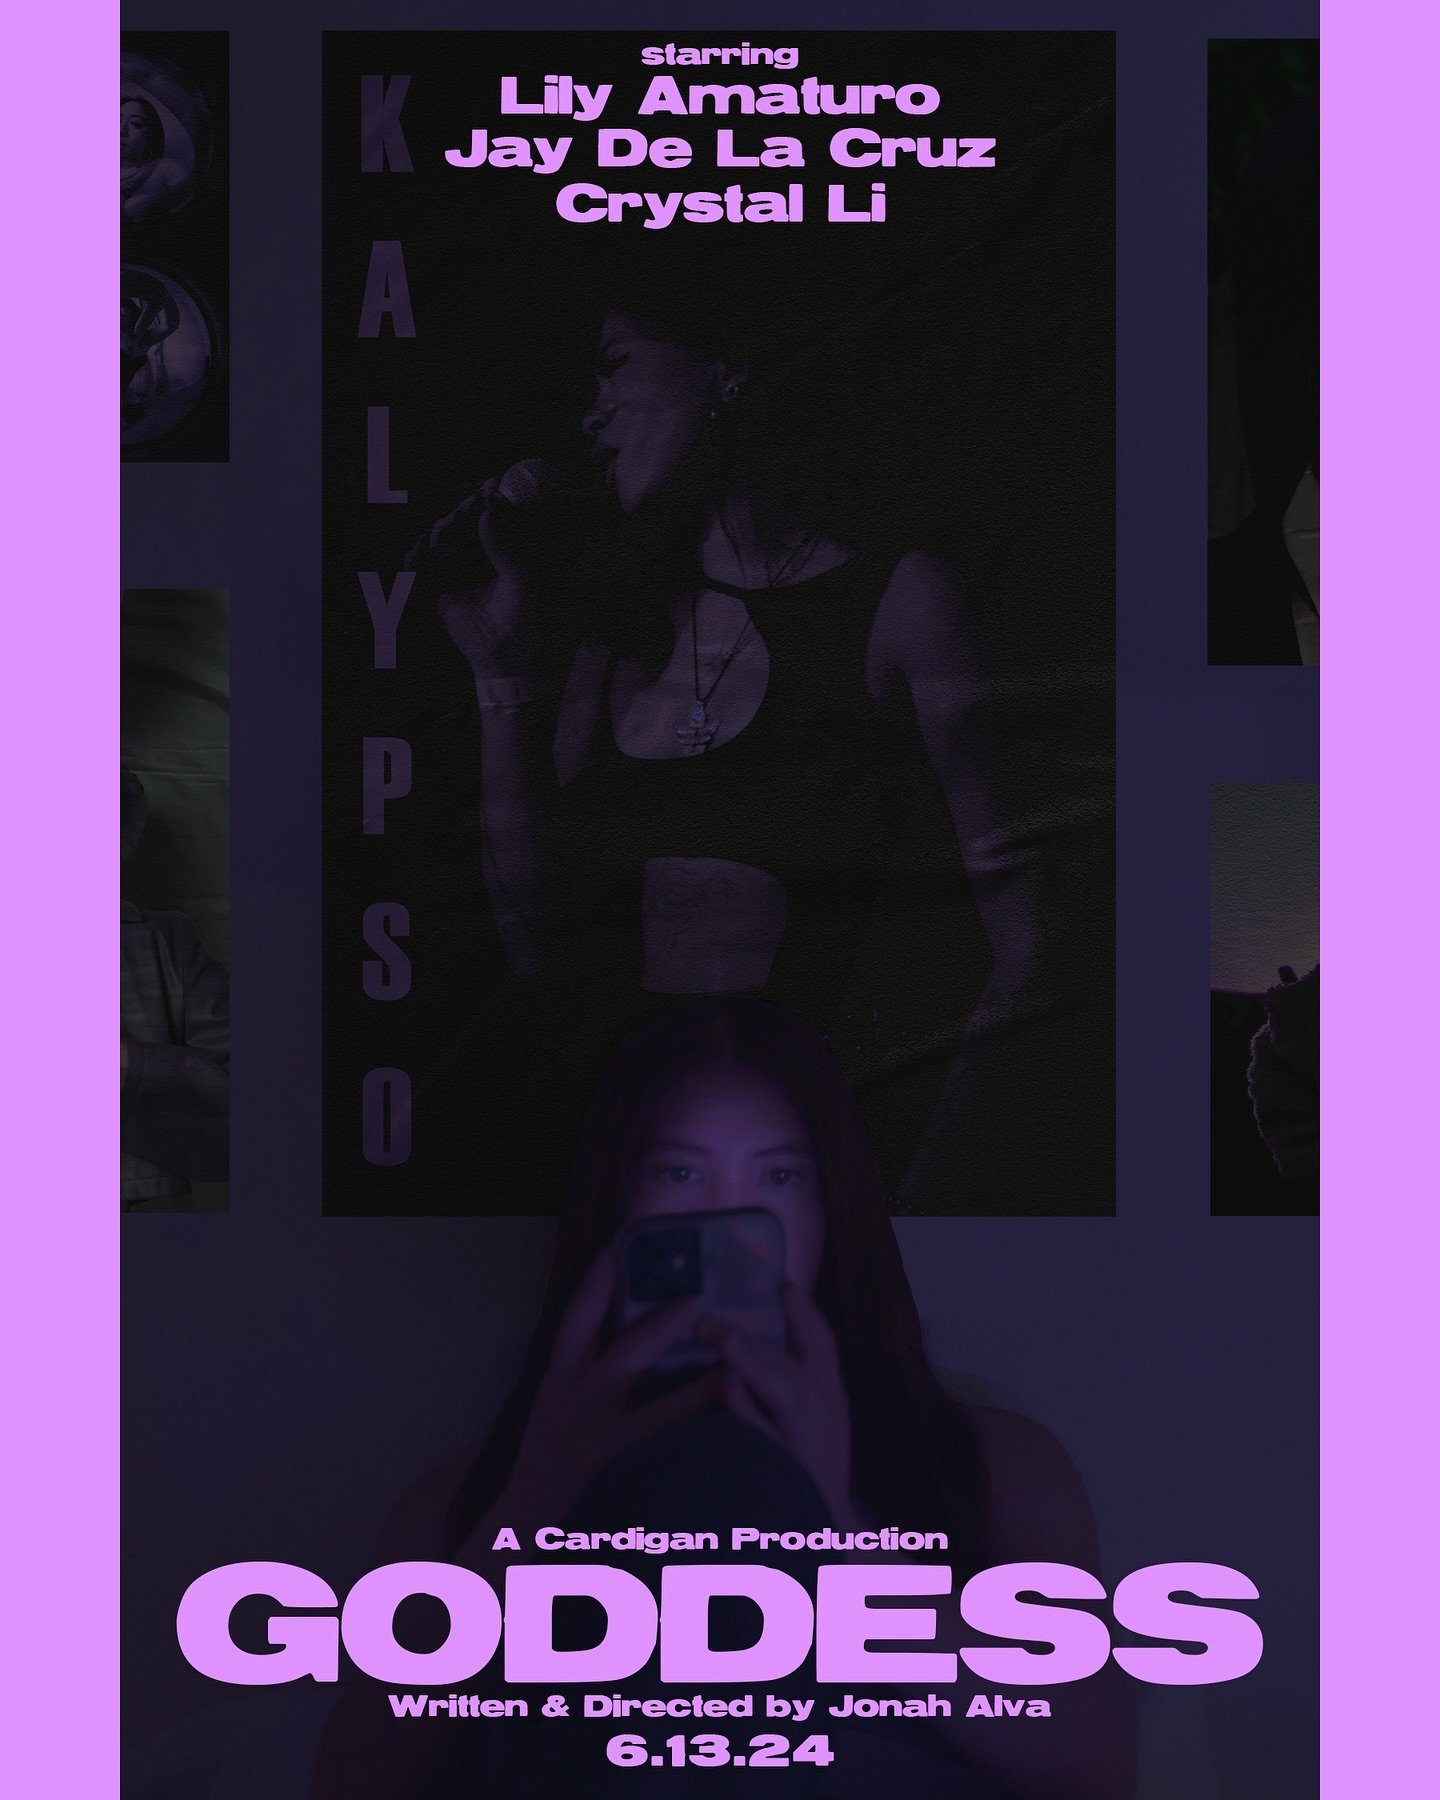 &ldquo;Goddess&rdquo; - A girl&rsquo;s fandom for music artist, Kalypso, grows into an obsession as she creates an Instagram page dedicated to the artist.

We had so much fun making this film and I cannot be more proud of how it came out and thankful